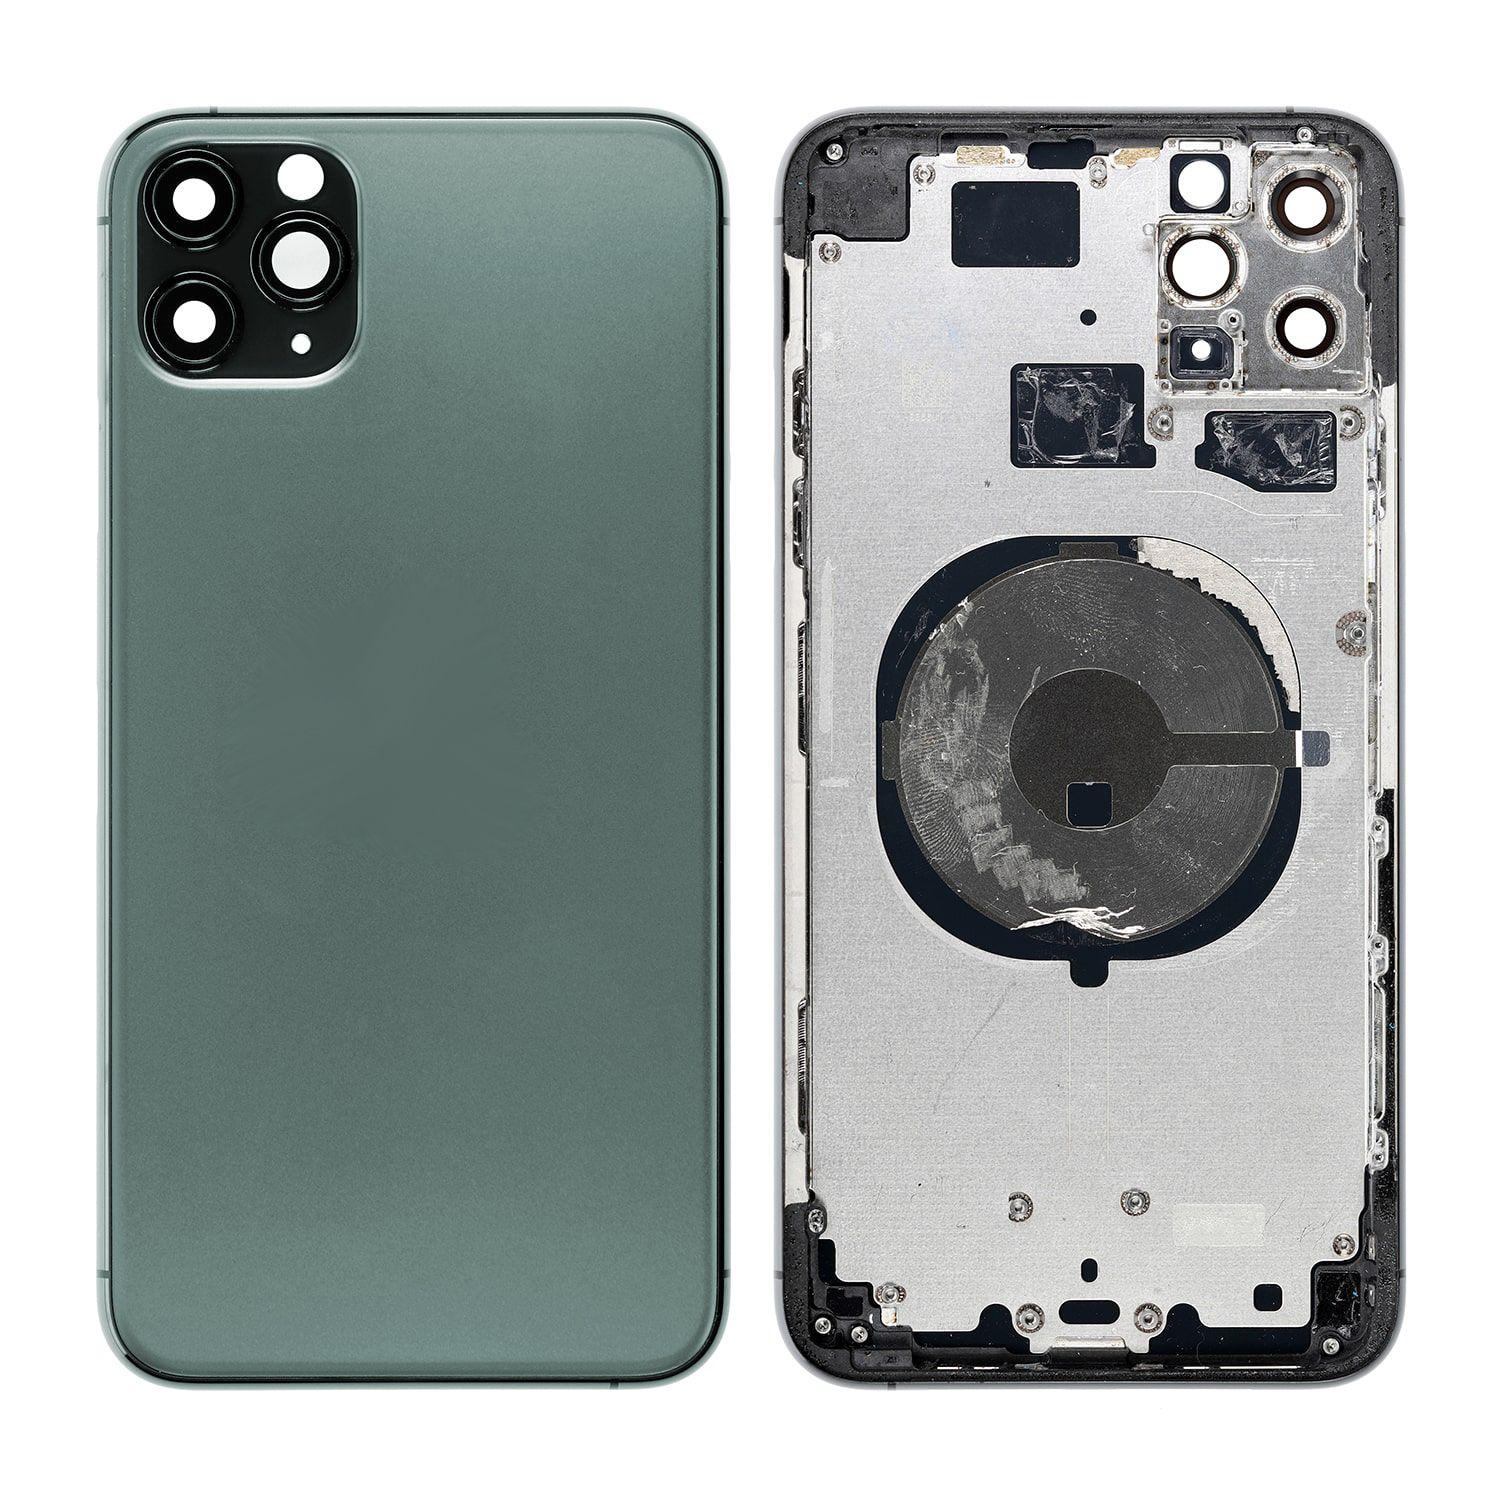 Body for iPhone 11 Pro Max + back cover green